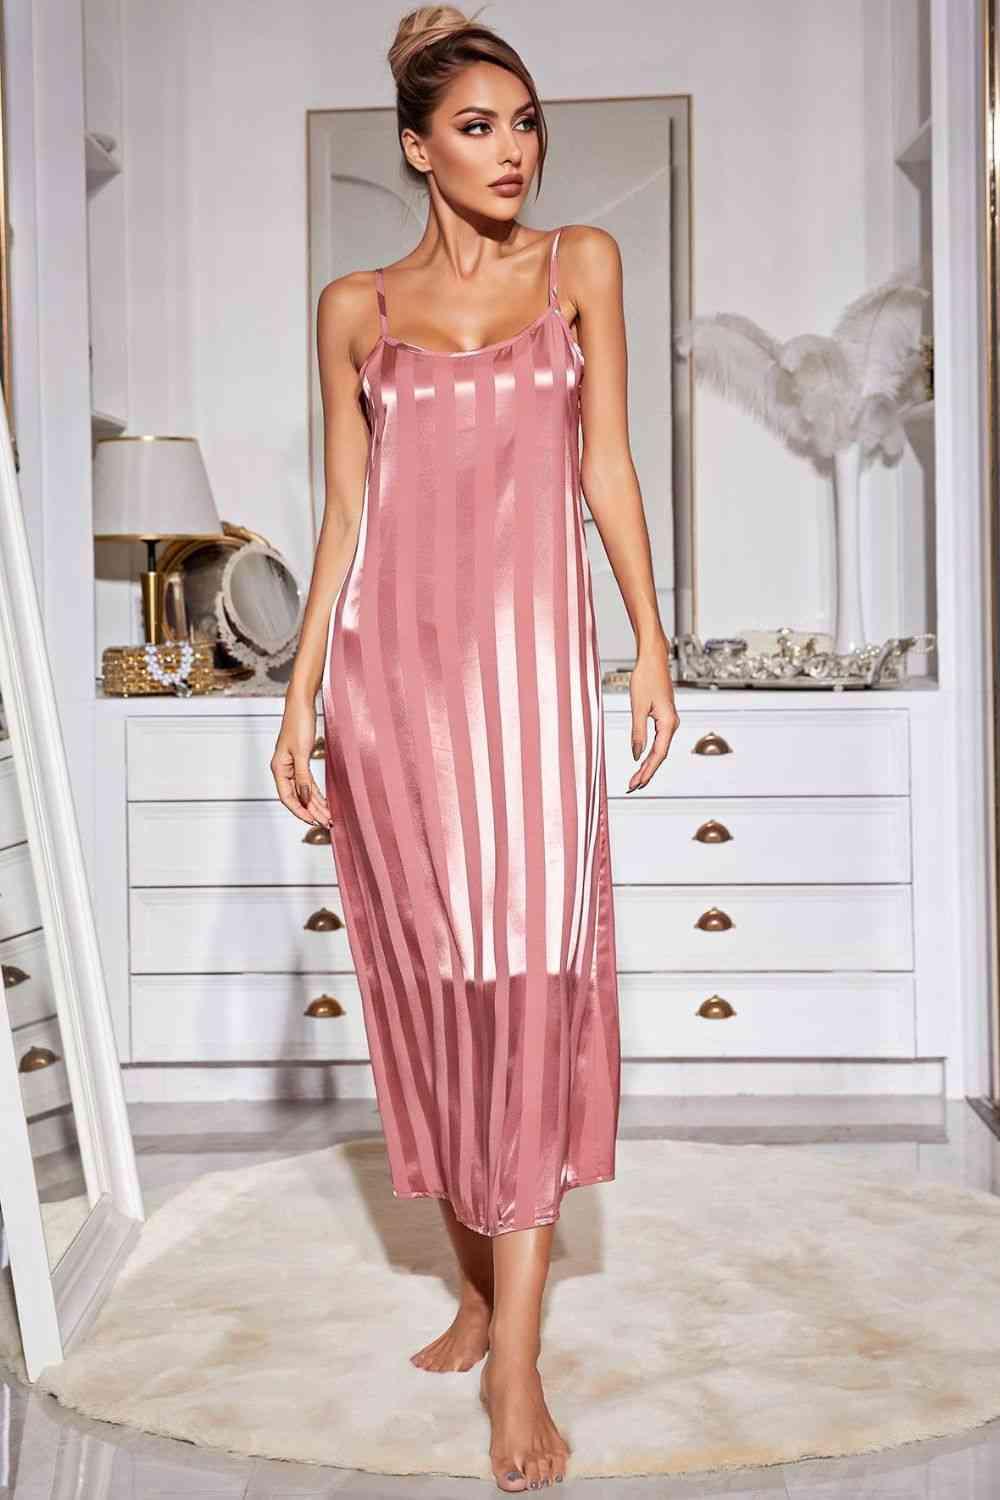 Striped Flounce Sleeve Open Front Robe and Cami Dress Set - Immenzive